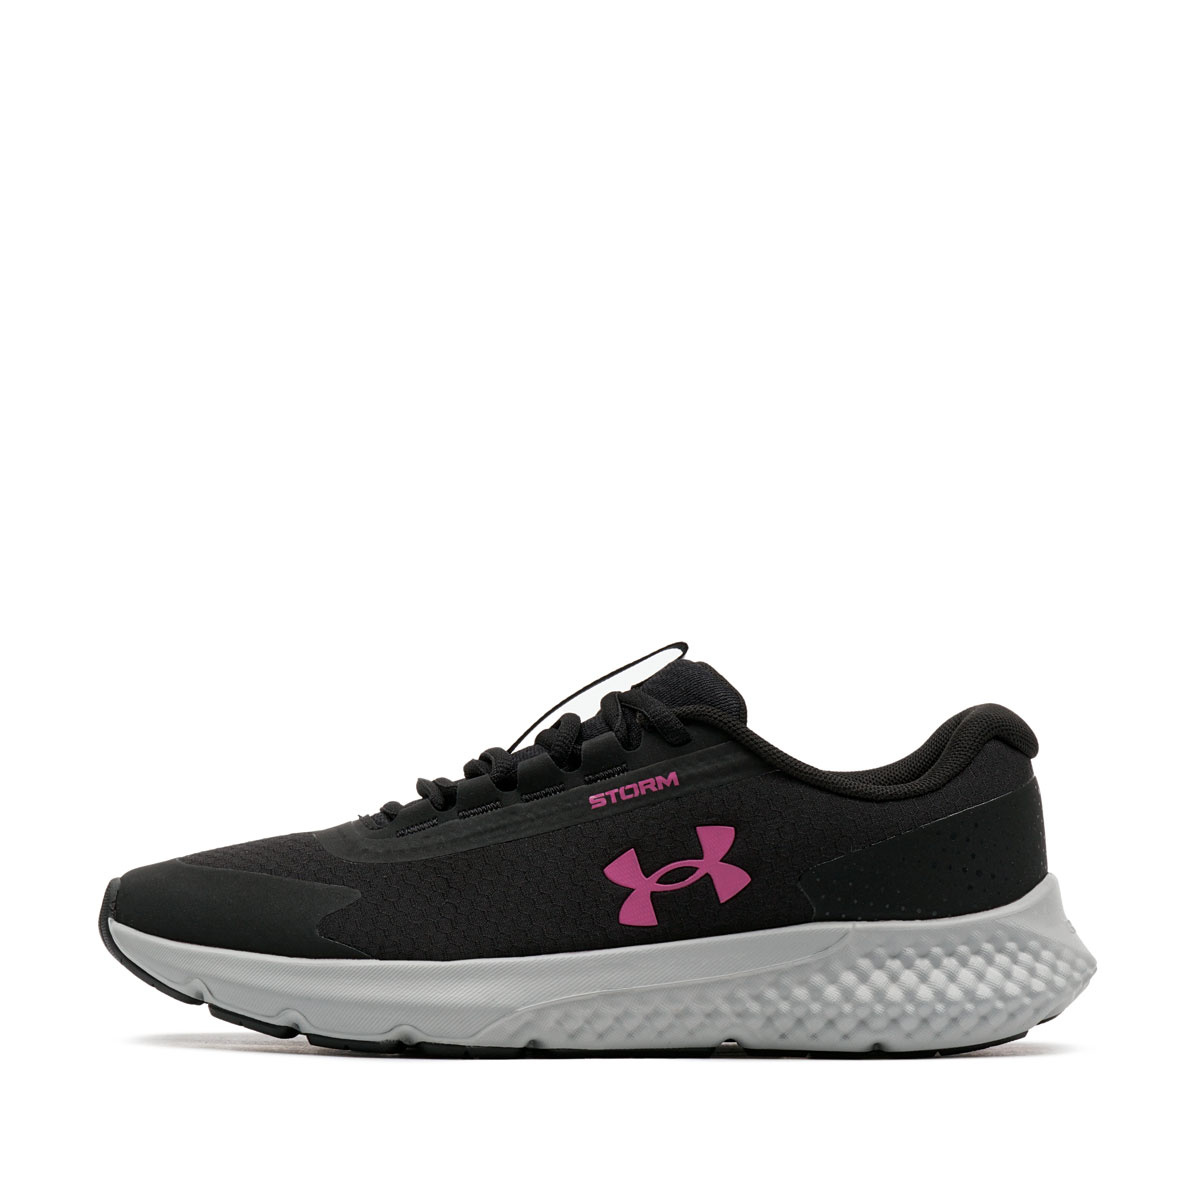 Under Armour Charged Rogue 3 Storm Дамски маратонки 3025524-002